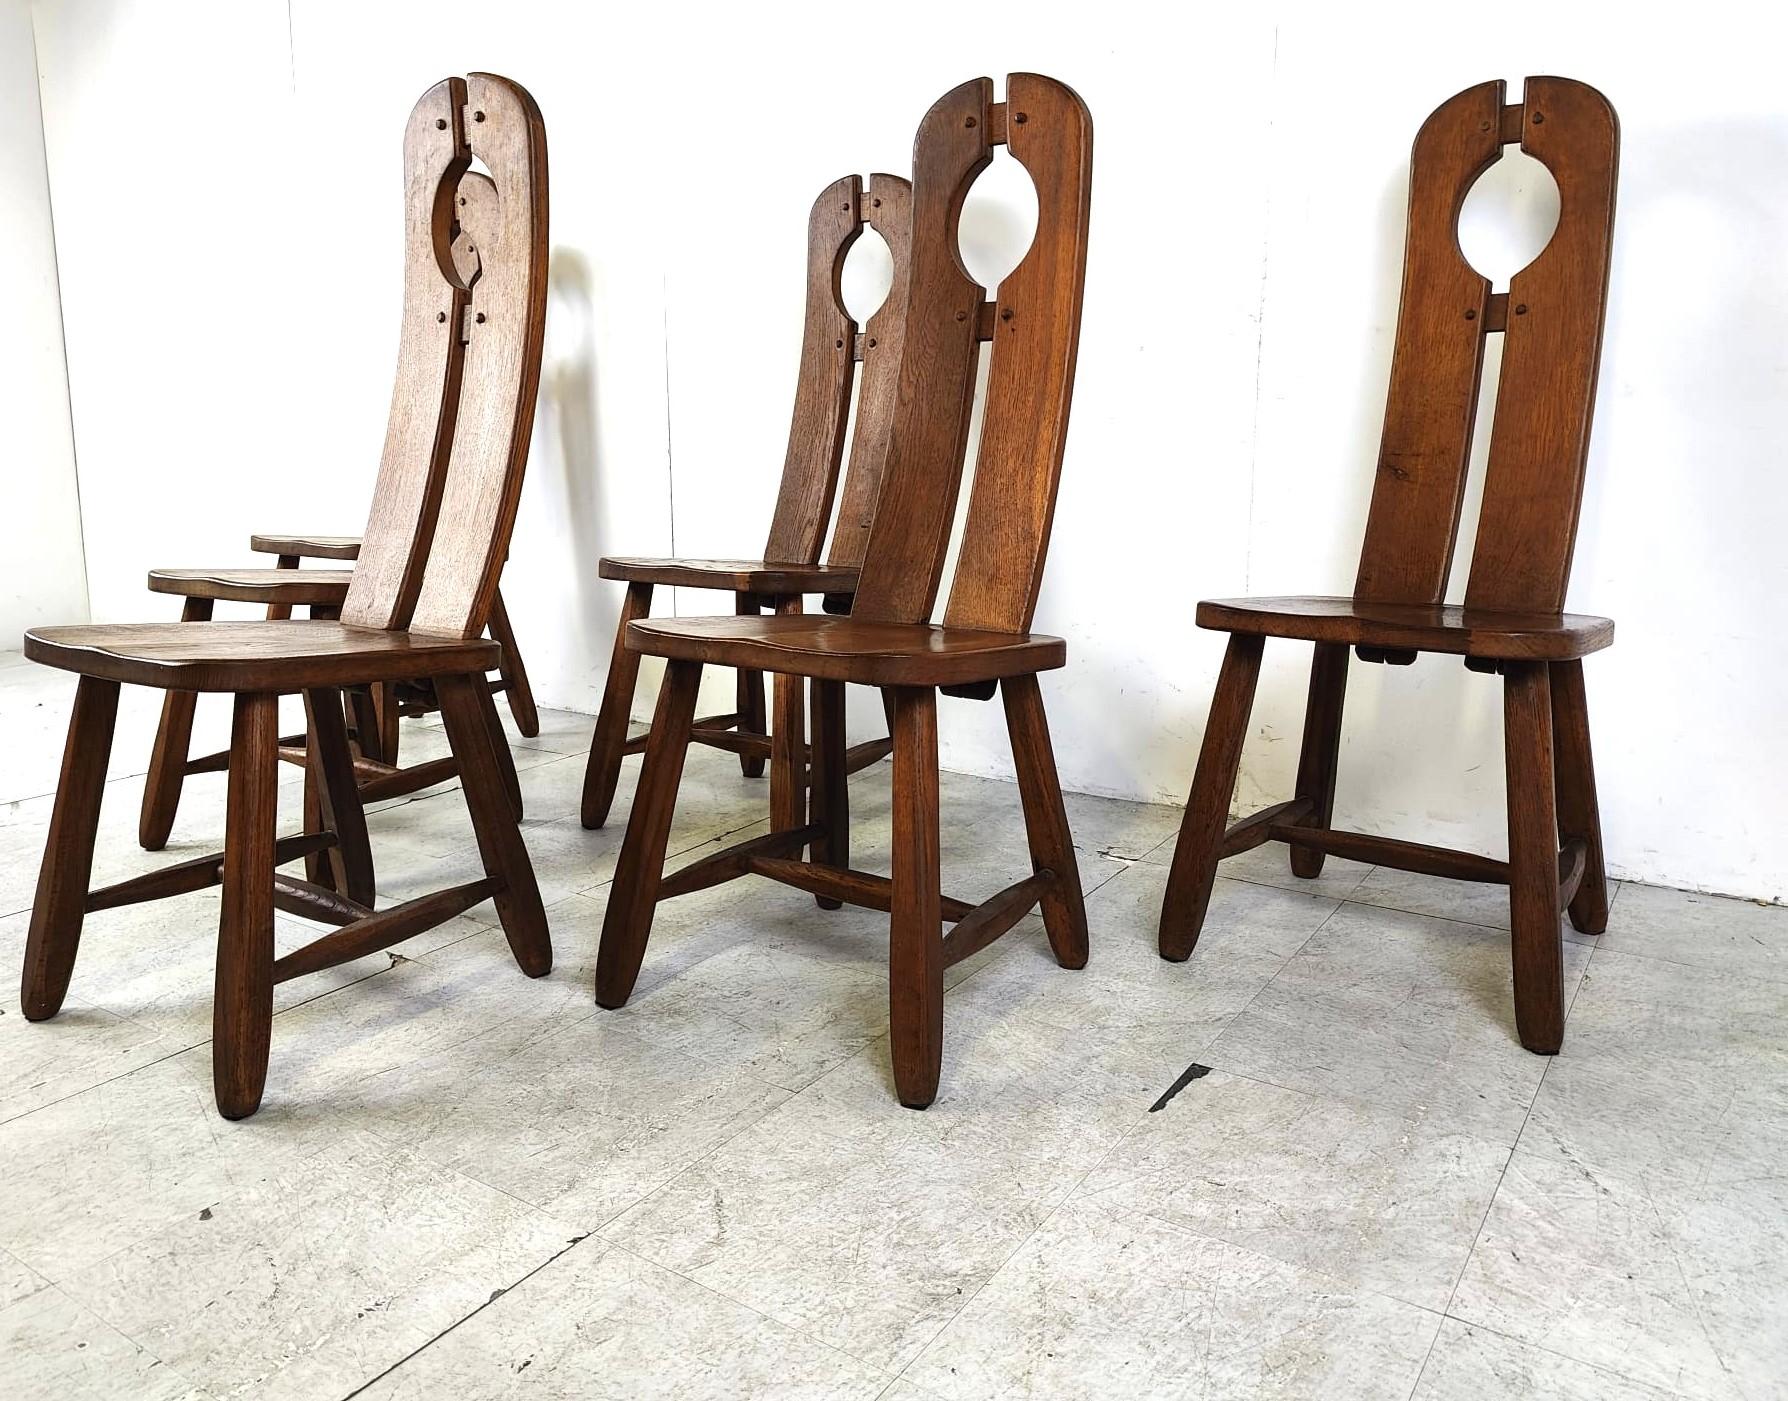 Vintage dining chairs by Depuydt, Belgium, set of 6 - 1960s For Sale 2